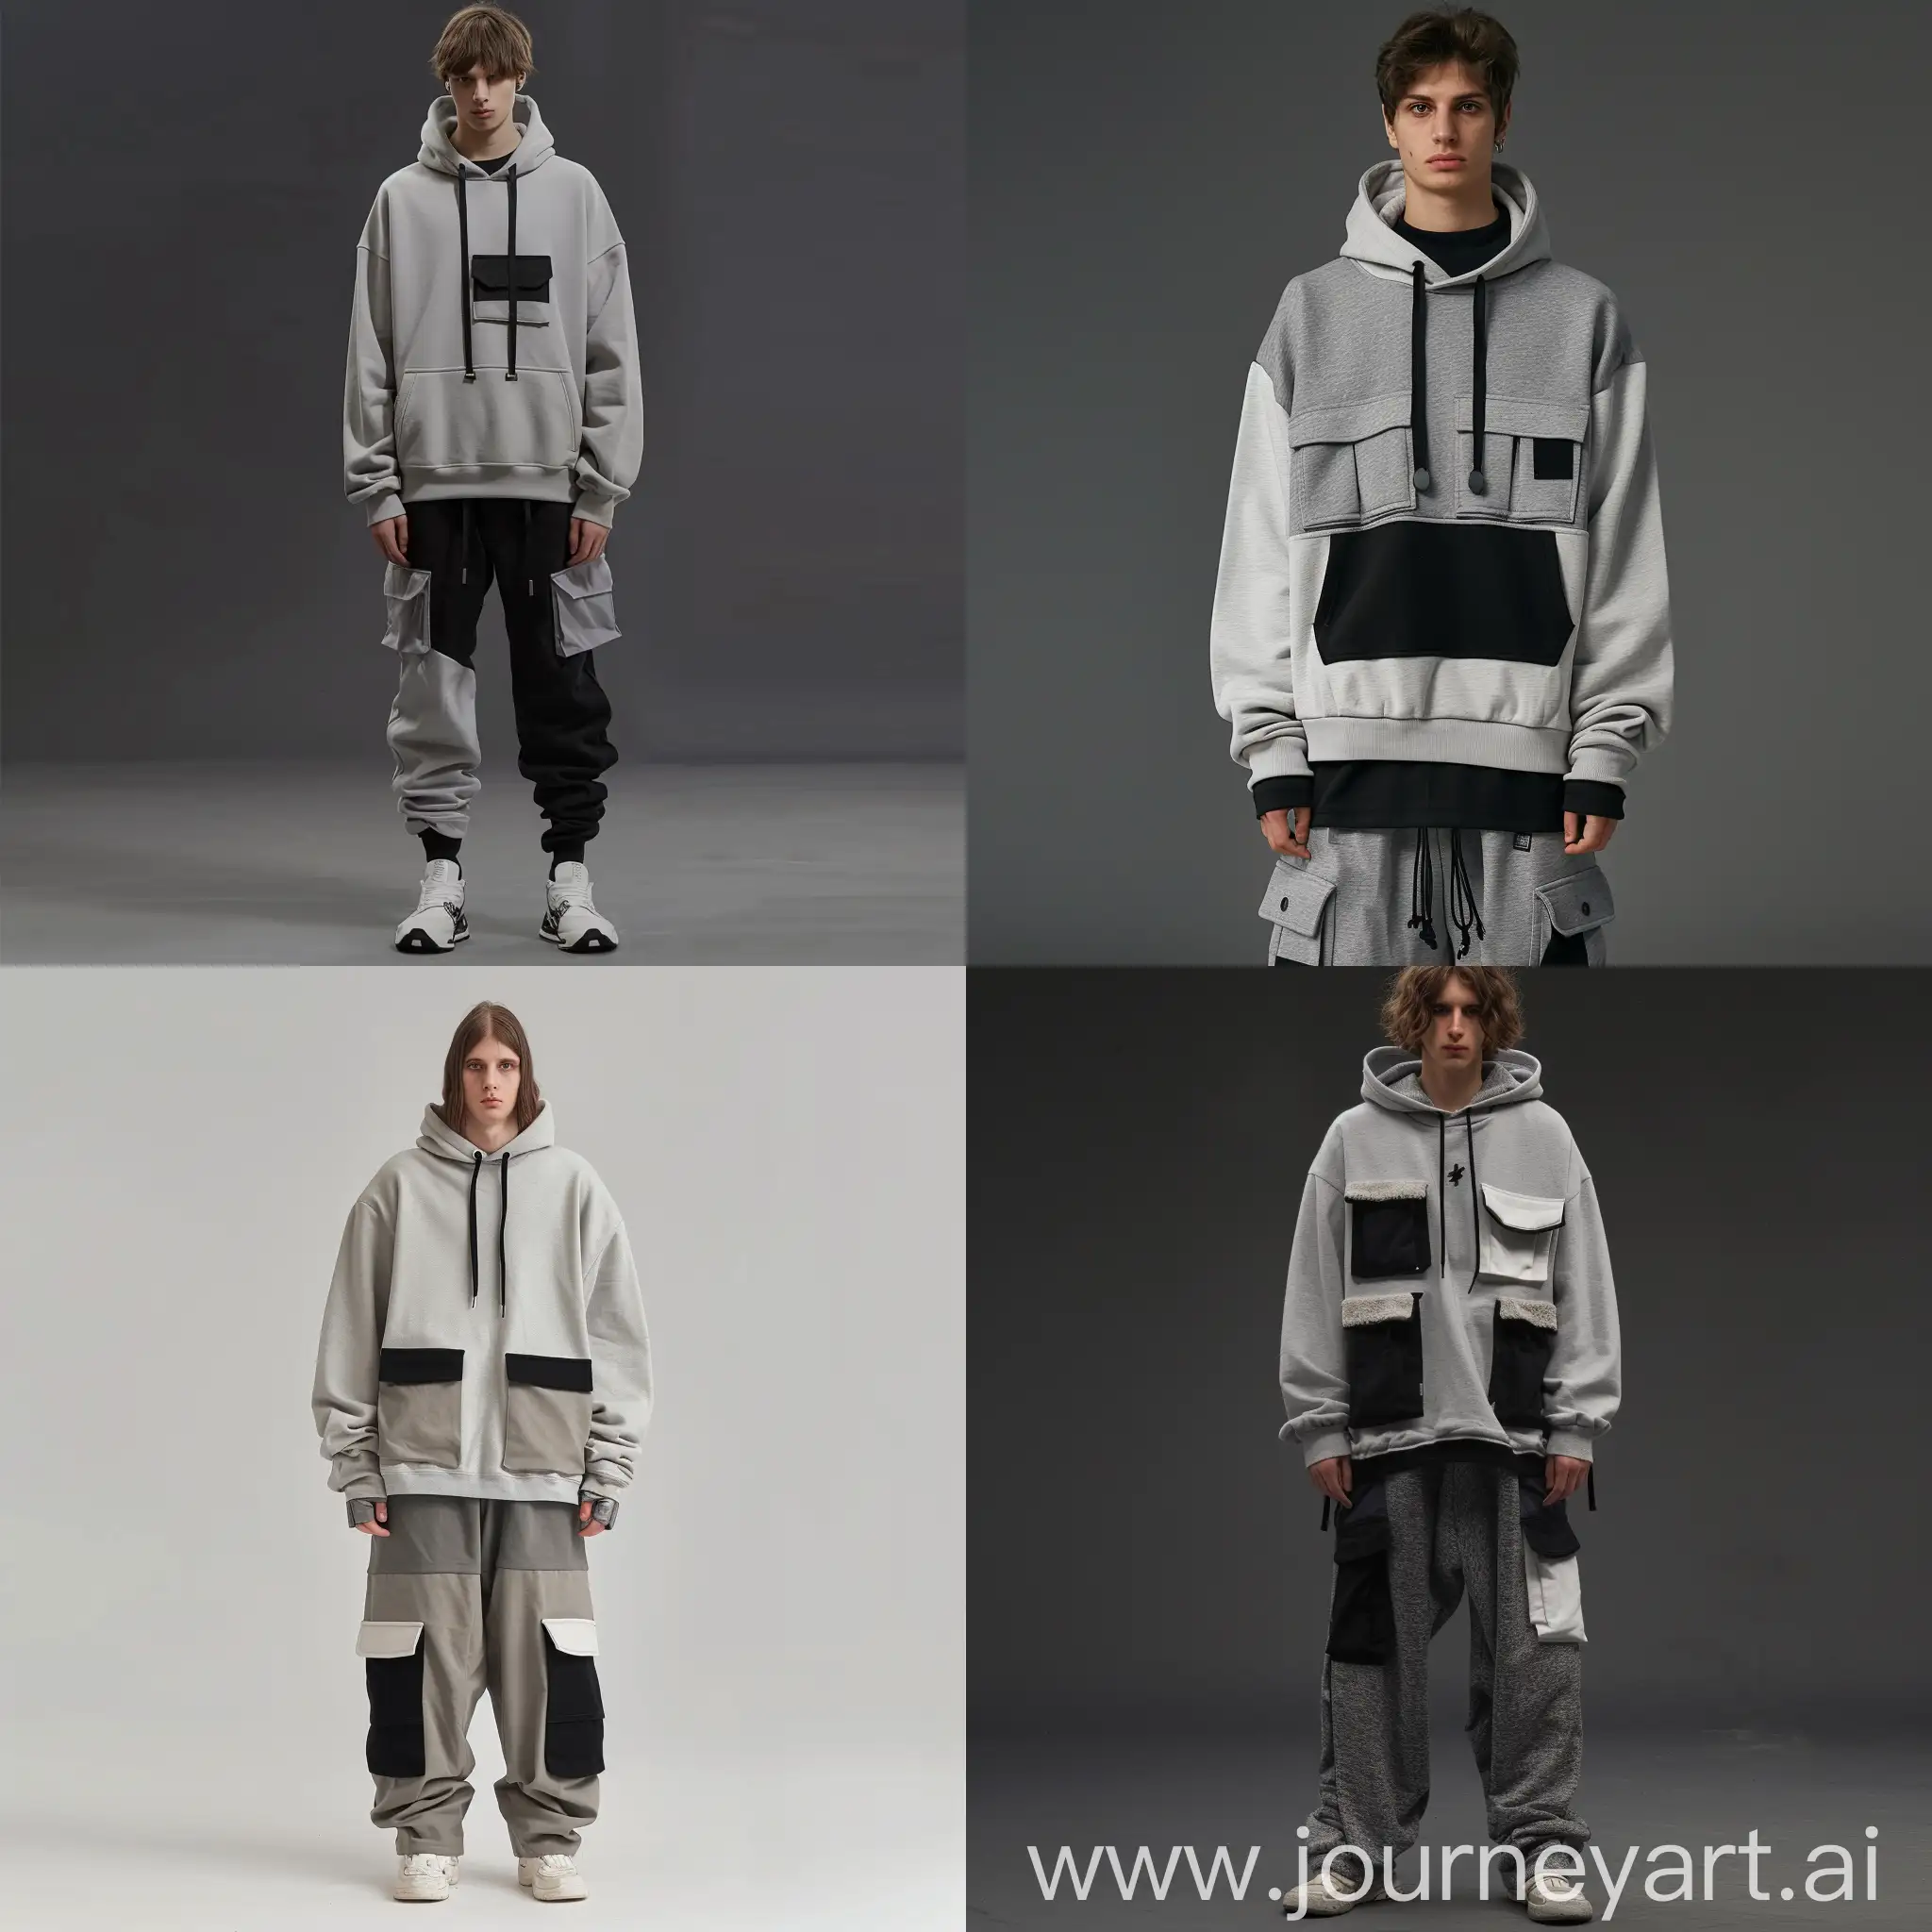 Imagine a male model wearing a comfy big hoody with lot of pockets and comfy pants with 2 colors grey and black